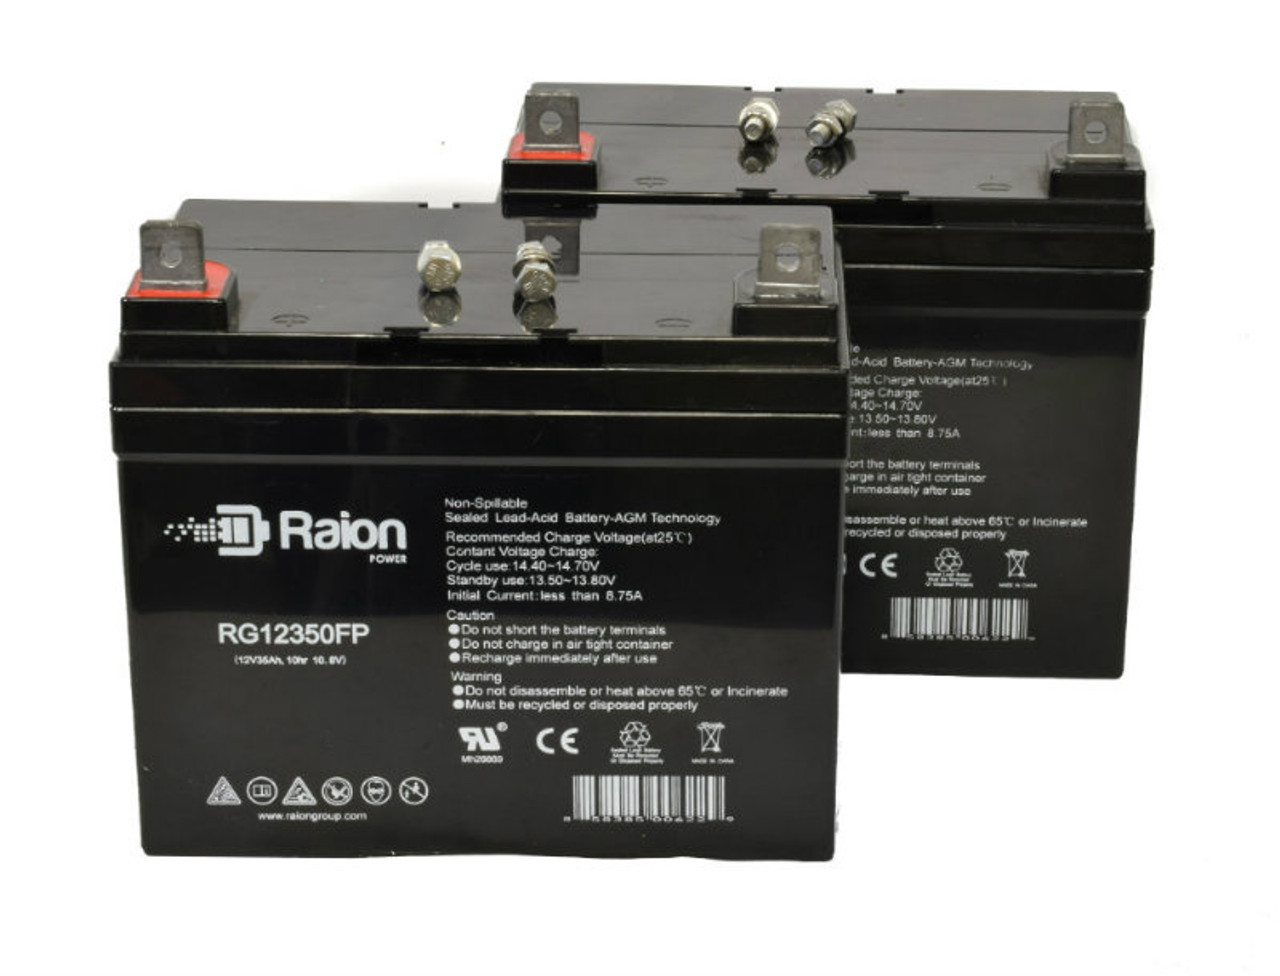 Raion Power Replacement 12V 35Ah Lawn Mower Battery for Ingersol Equipment 4120 - 2 Pack